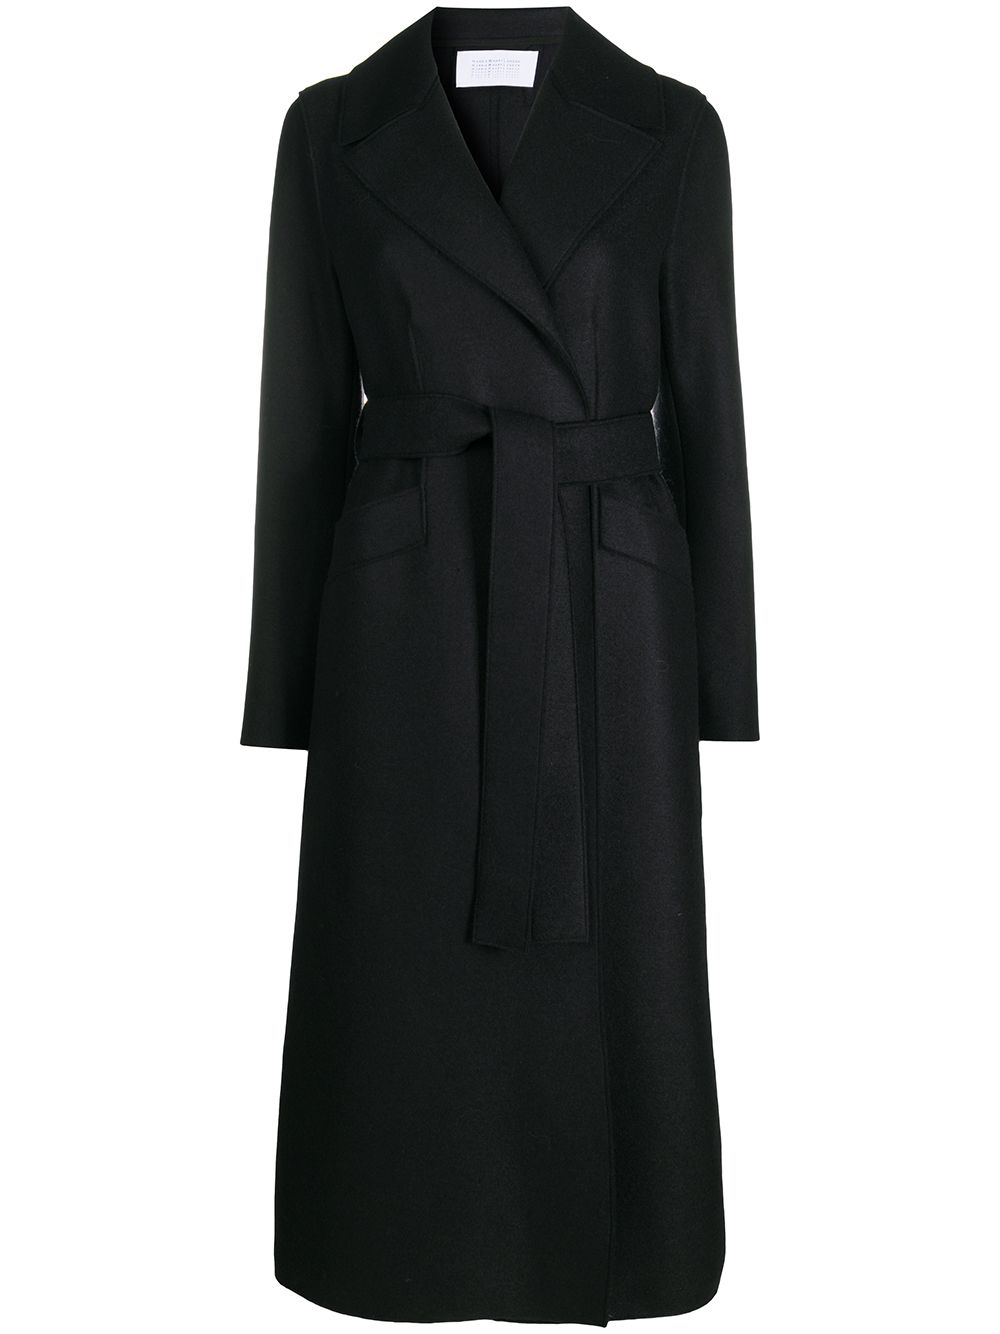 Shop Harris Wharf London tie-waist wool coat with Express Delivery ...